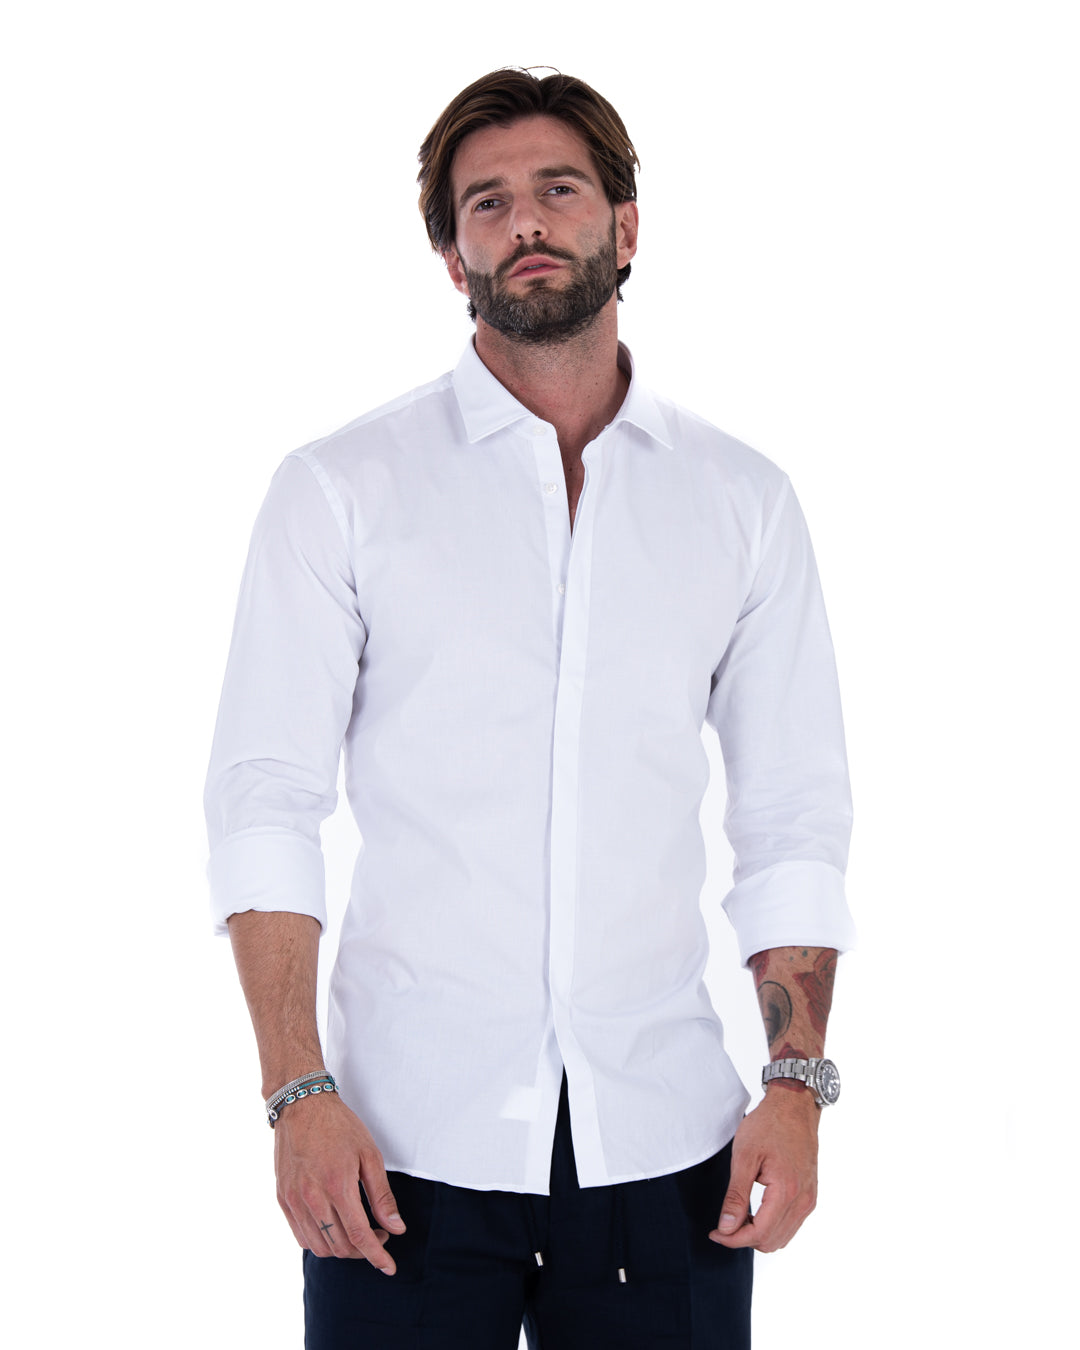 Shirt - classic white basic in cotton